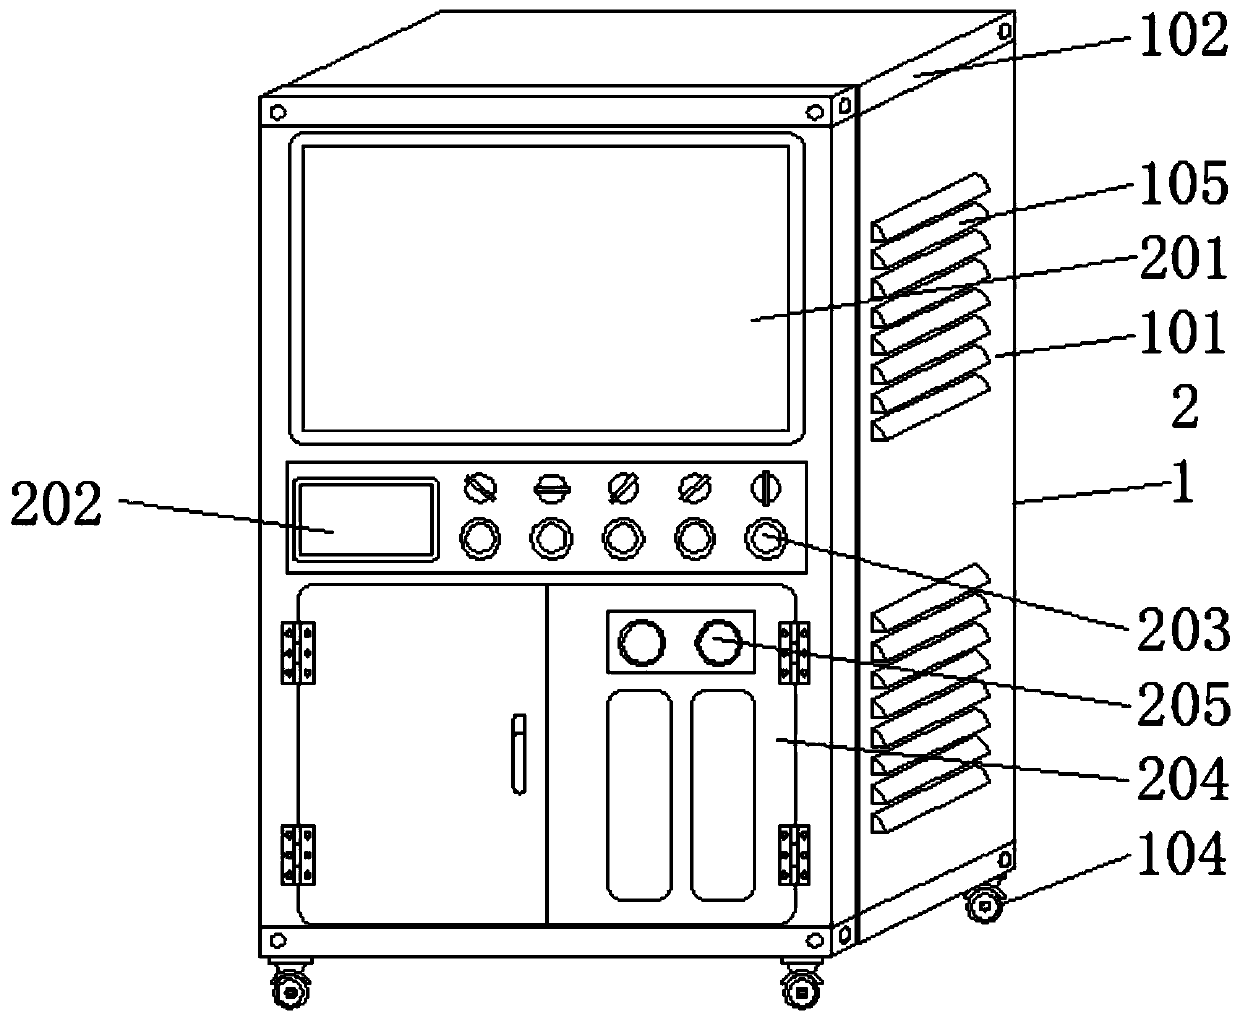 High-stability AC low-voltage control cabinet